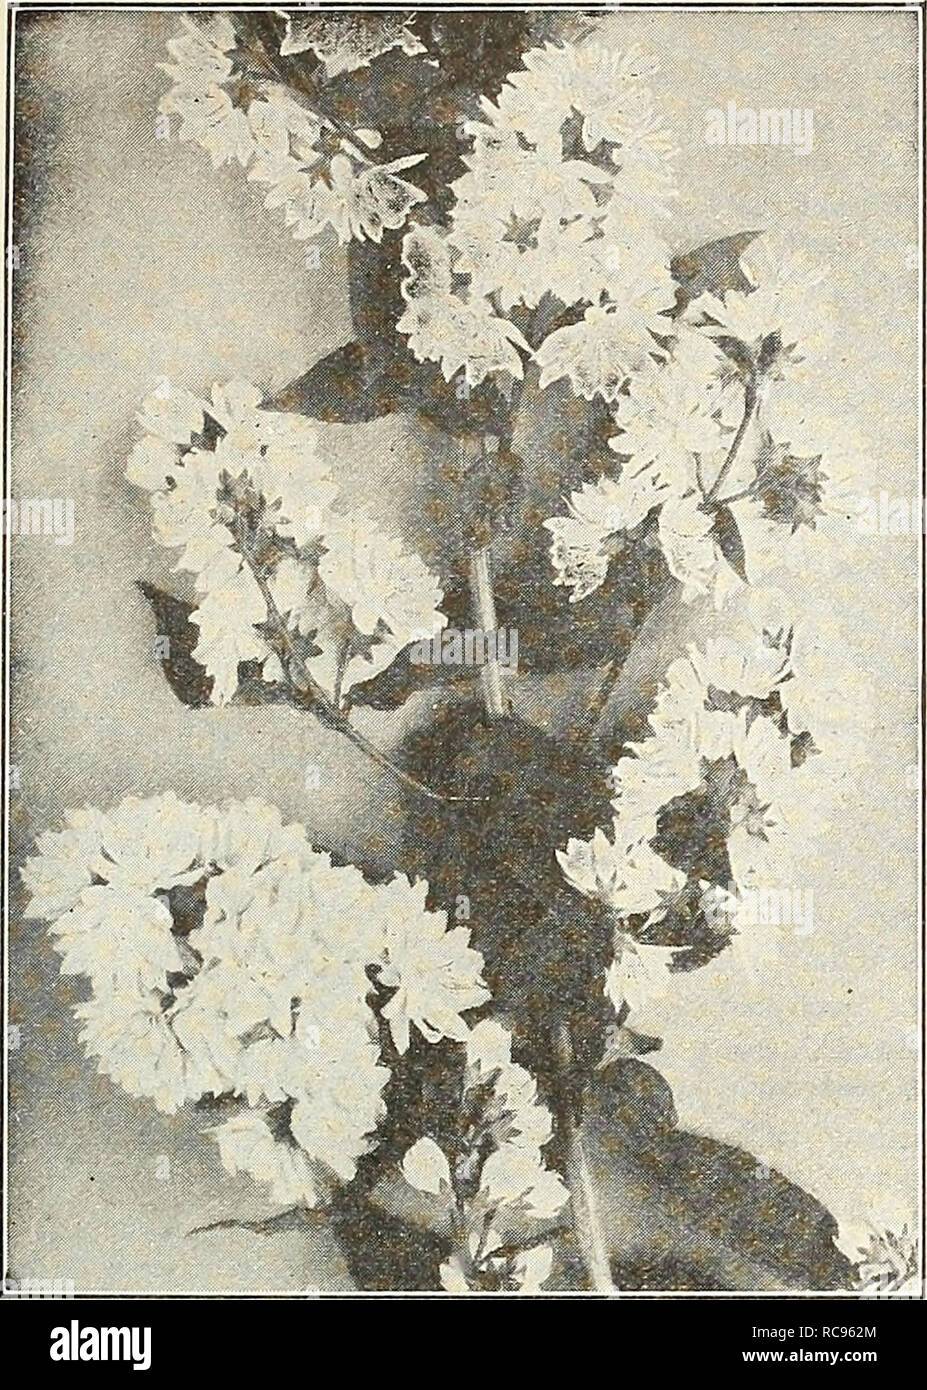 . Dreer's garden book 1927. Seeds Catalogs; Nursery stock Catalogs; Gardening Equipment and supplies Catalogs; Flowers Seeds Catalogs; Vegetables Seeds Catalogs; Fruit Seeds Catalogs. /flElTAIIlBtotoaaimMMiig^llgr^^^ 209. Deutzia Crenata Magnifica Deutzias. Well-known profuse flowering Shrubs, blooming in spring or early summer. The dwarf varieties are desirable for forcing under glass. — Candidissima plena. A fine tall, double white, 60 cts. each. — Crenata Magnifica. A most distinct variety with excep- tionally large corymbs of pure white double flowers, produced in wonderful profusion. 60 c Stock Photo